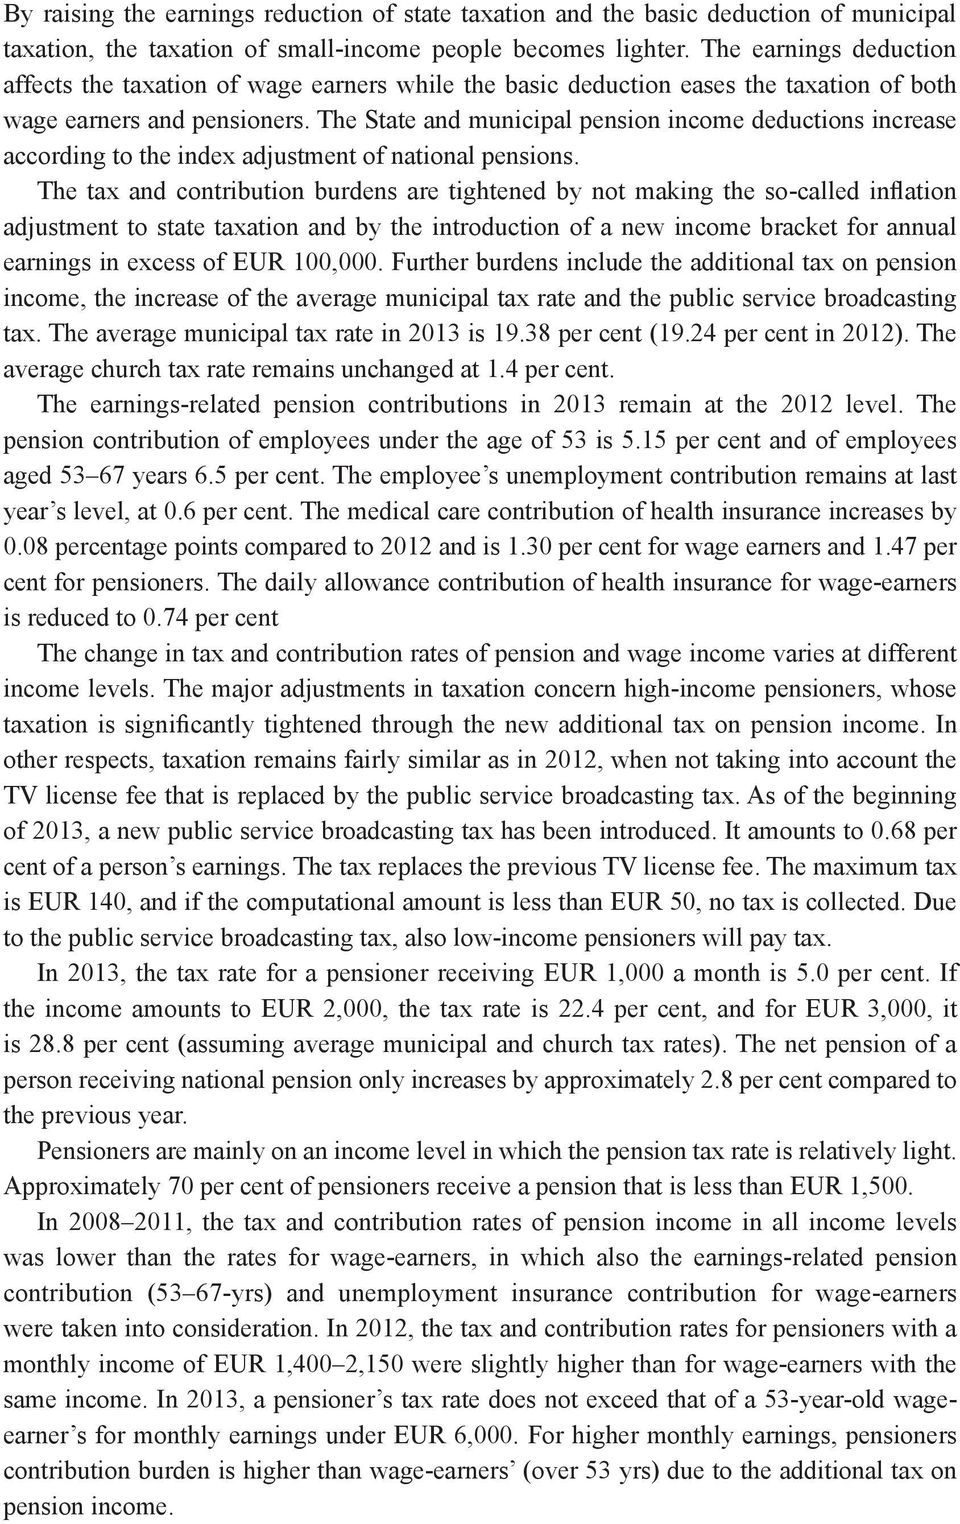 The State and municipal pension income deductions increase according to the index adjustment of national pensions.